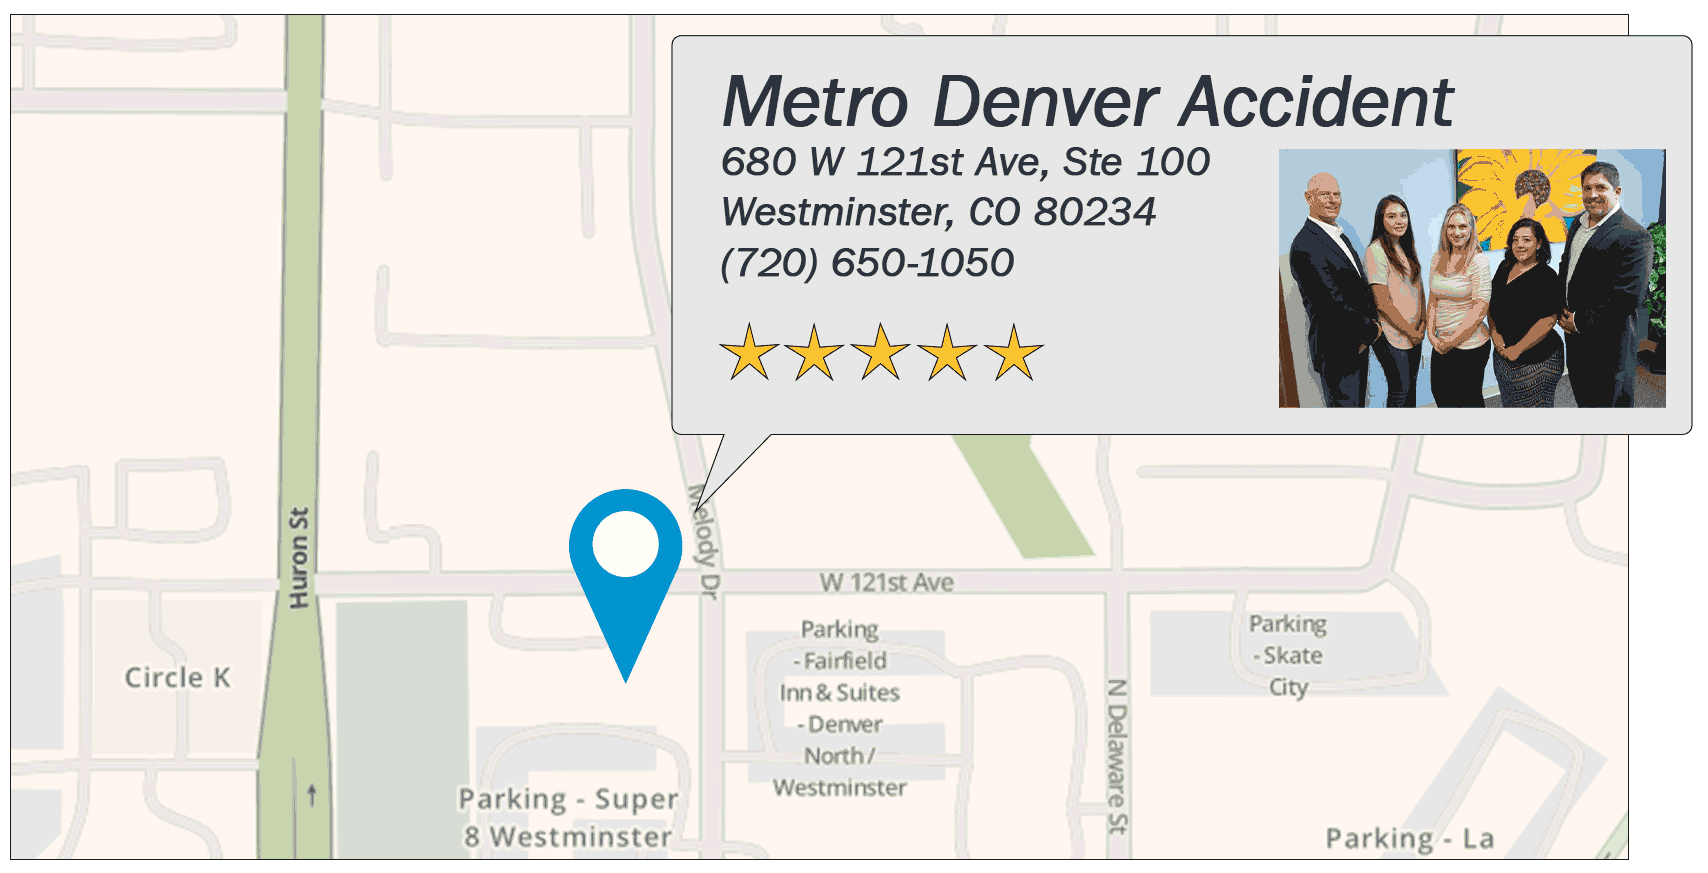 Center For Auto Accident Injury Treatment's Westminster office location on google map